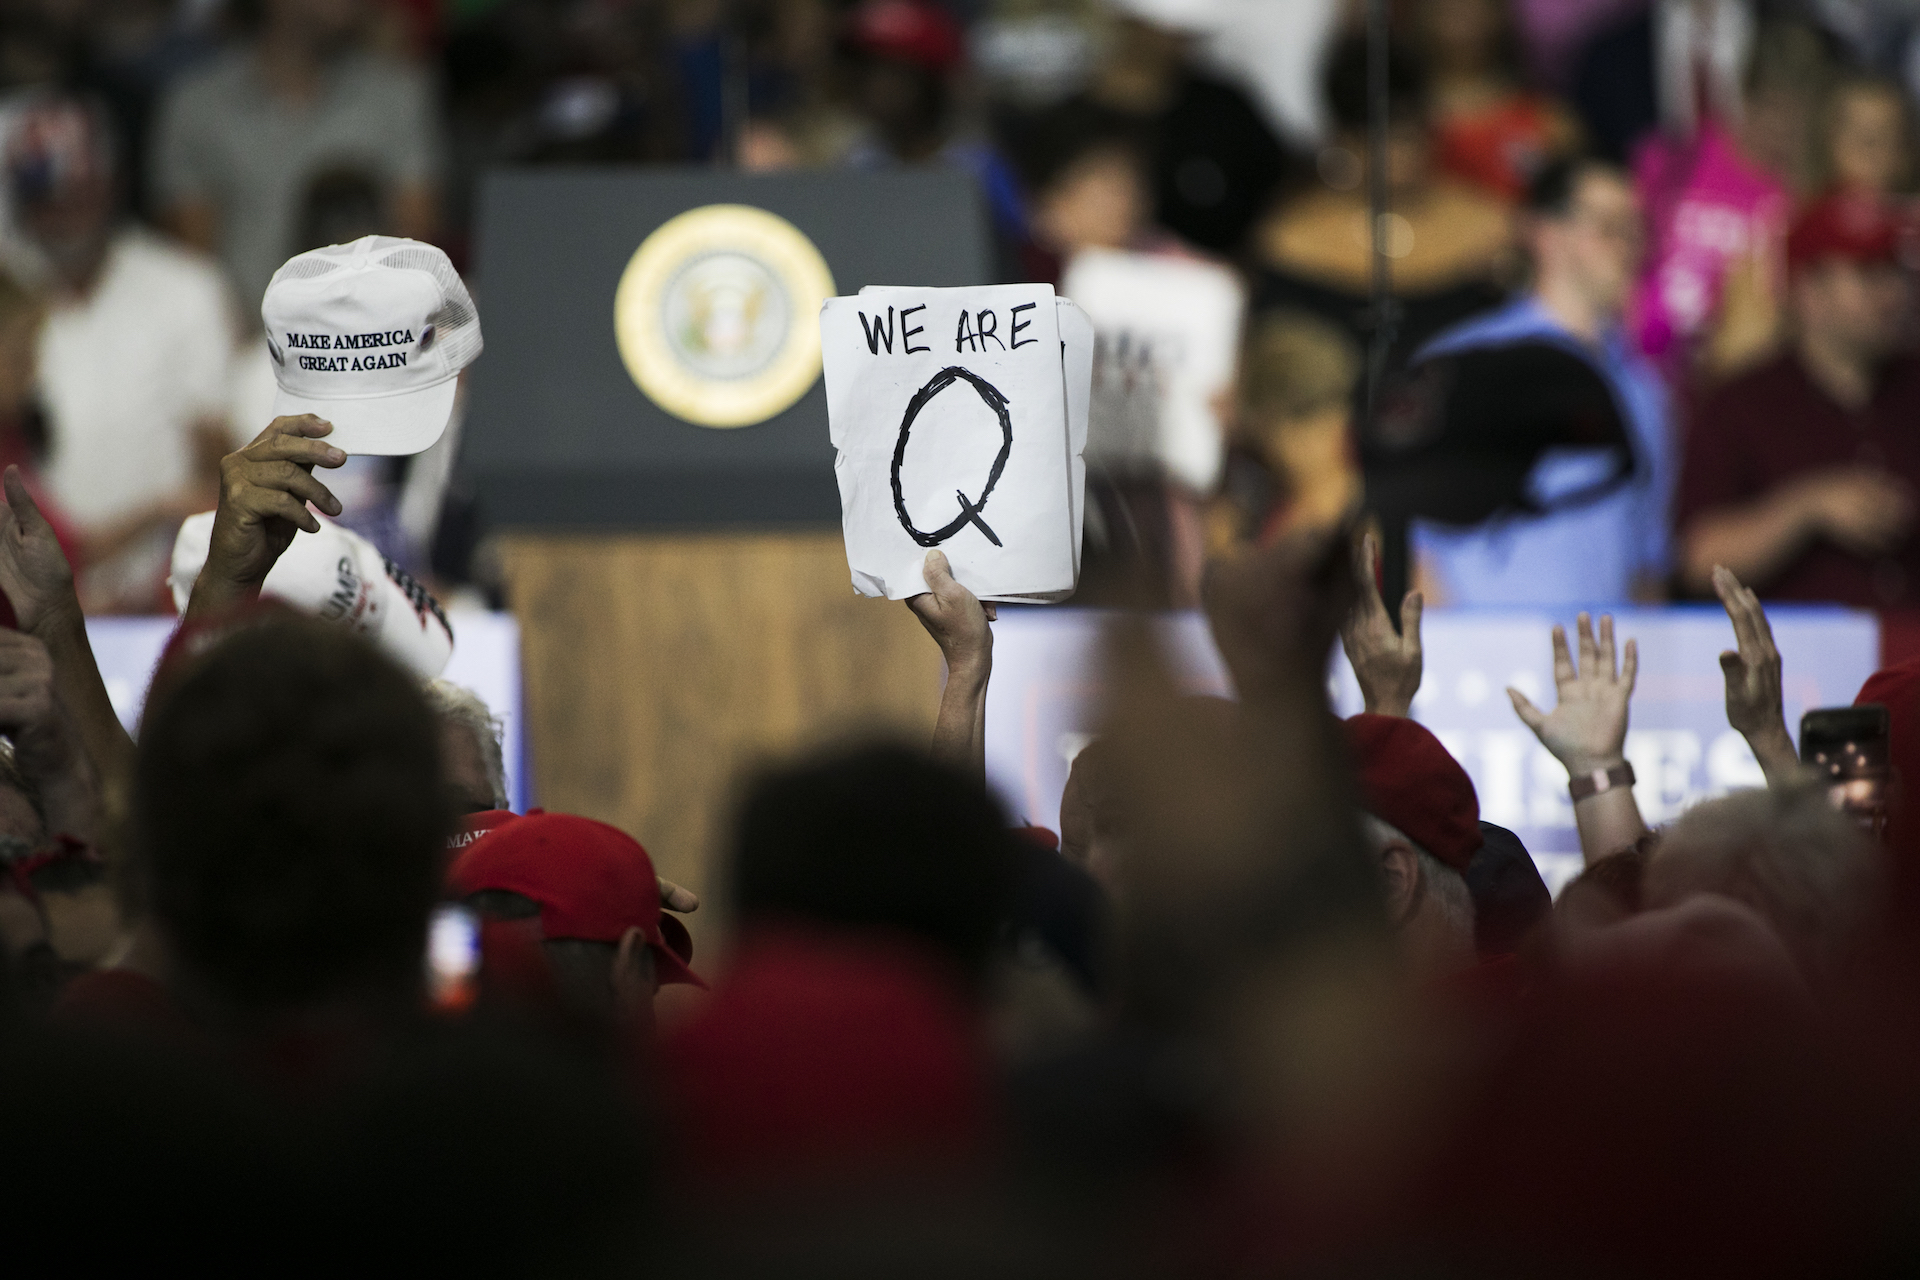 Owner of 8chan/8kun helps create QAnon super PAC and is running